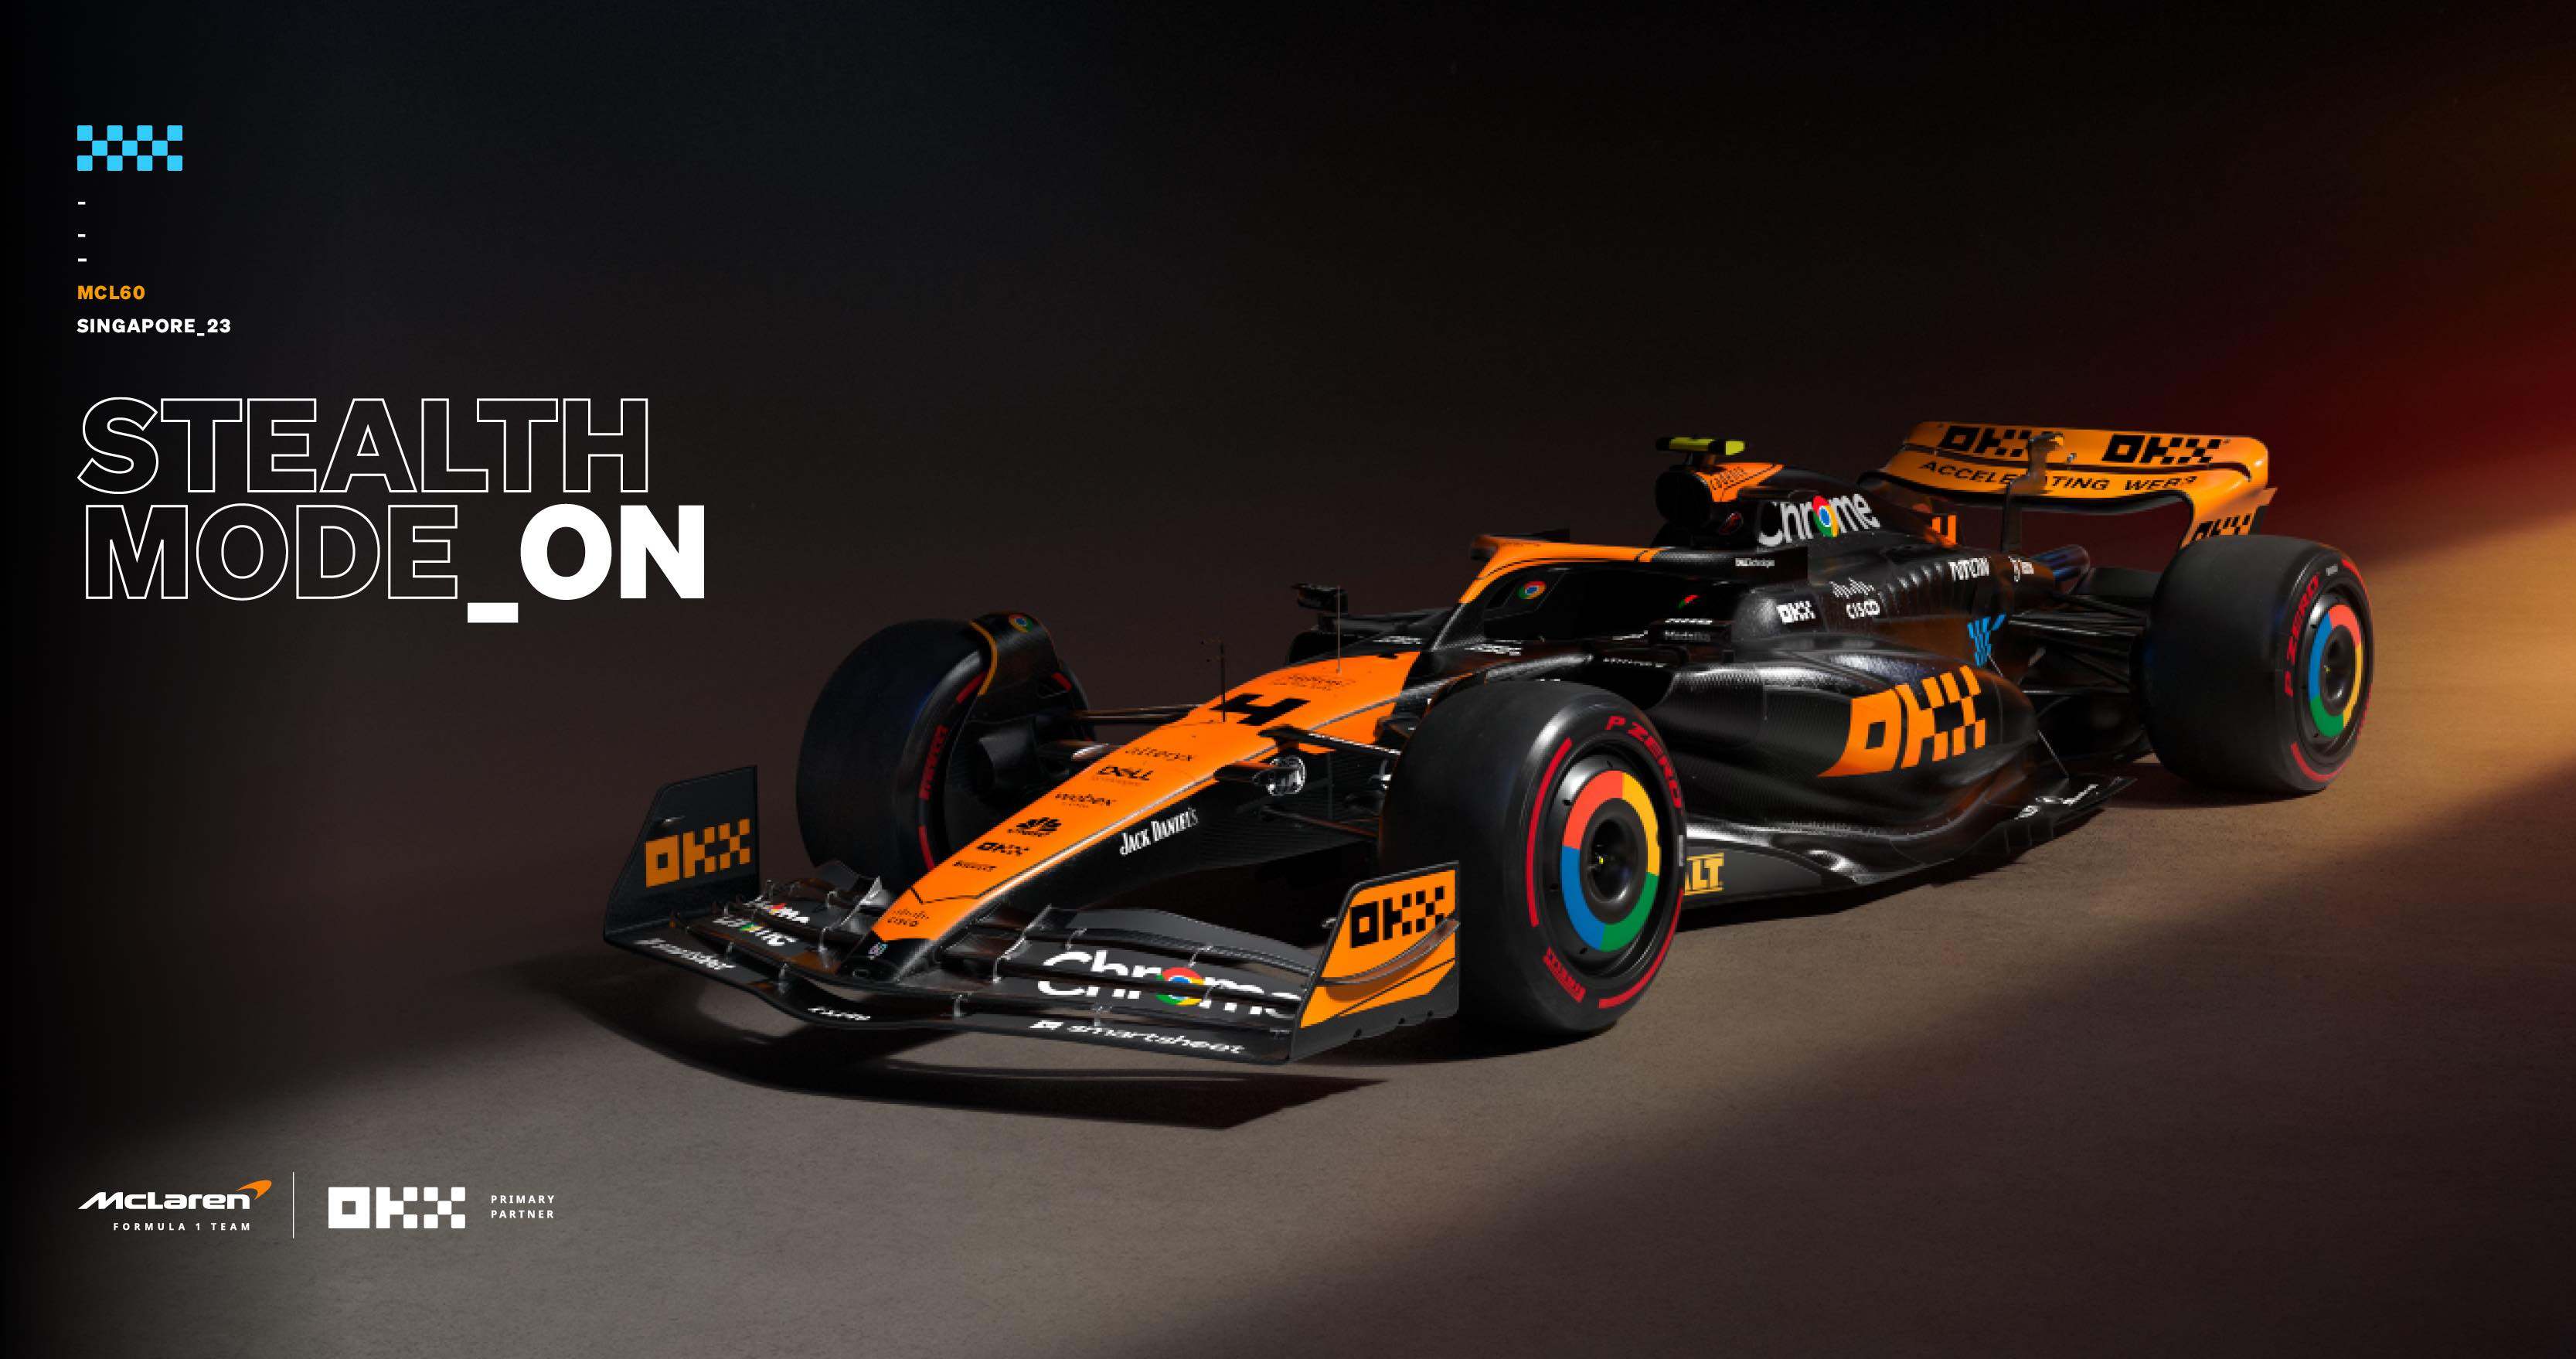 OKX switch McLaren MCL60 race car to Stealth Mode for the